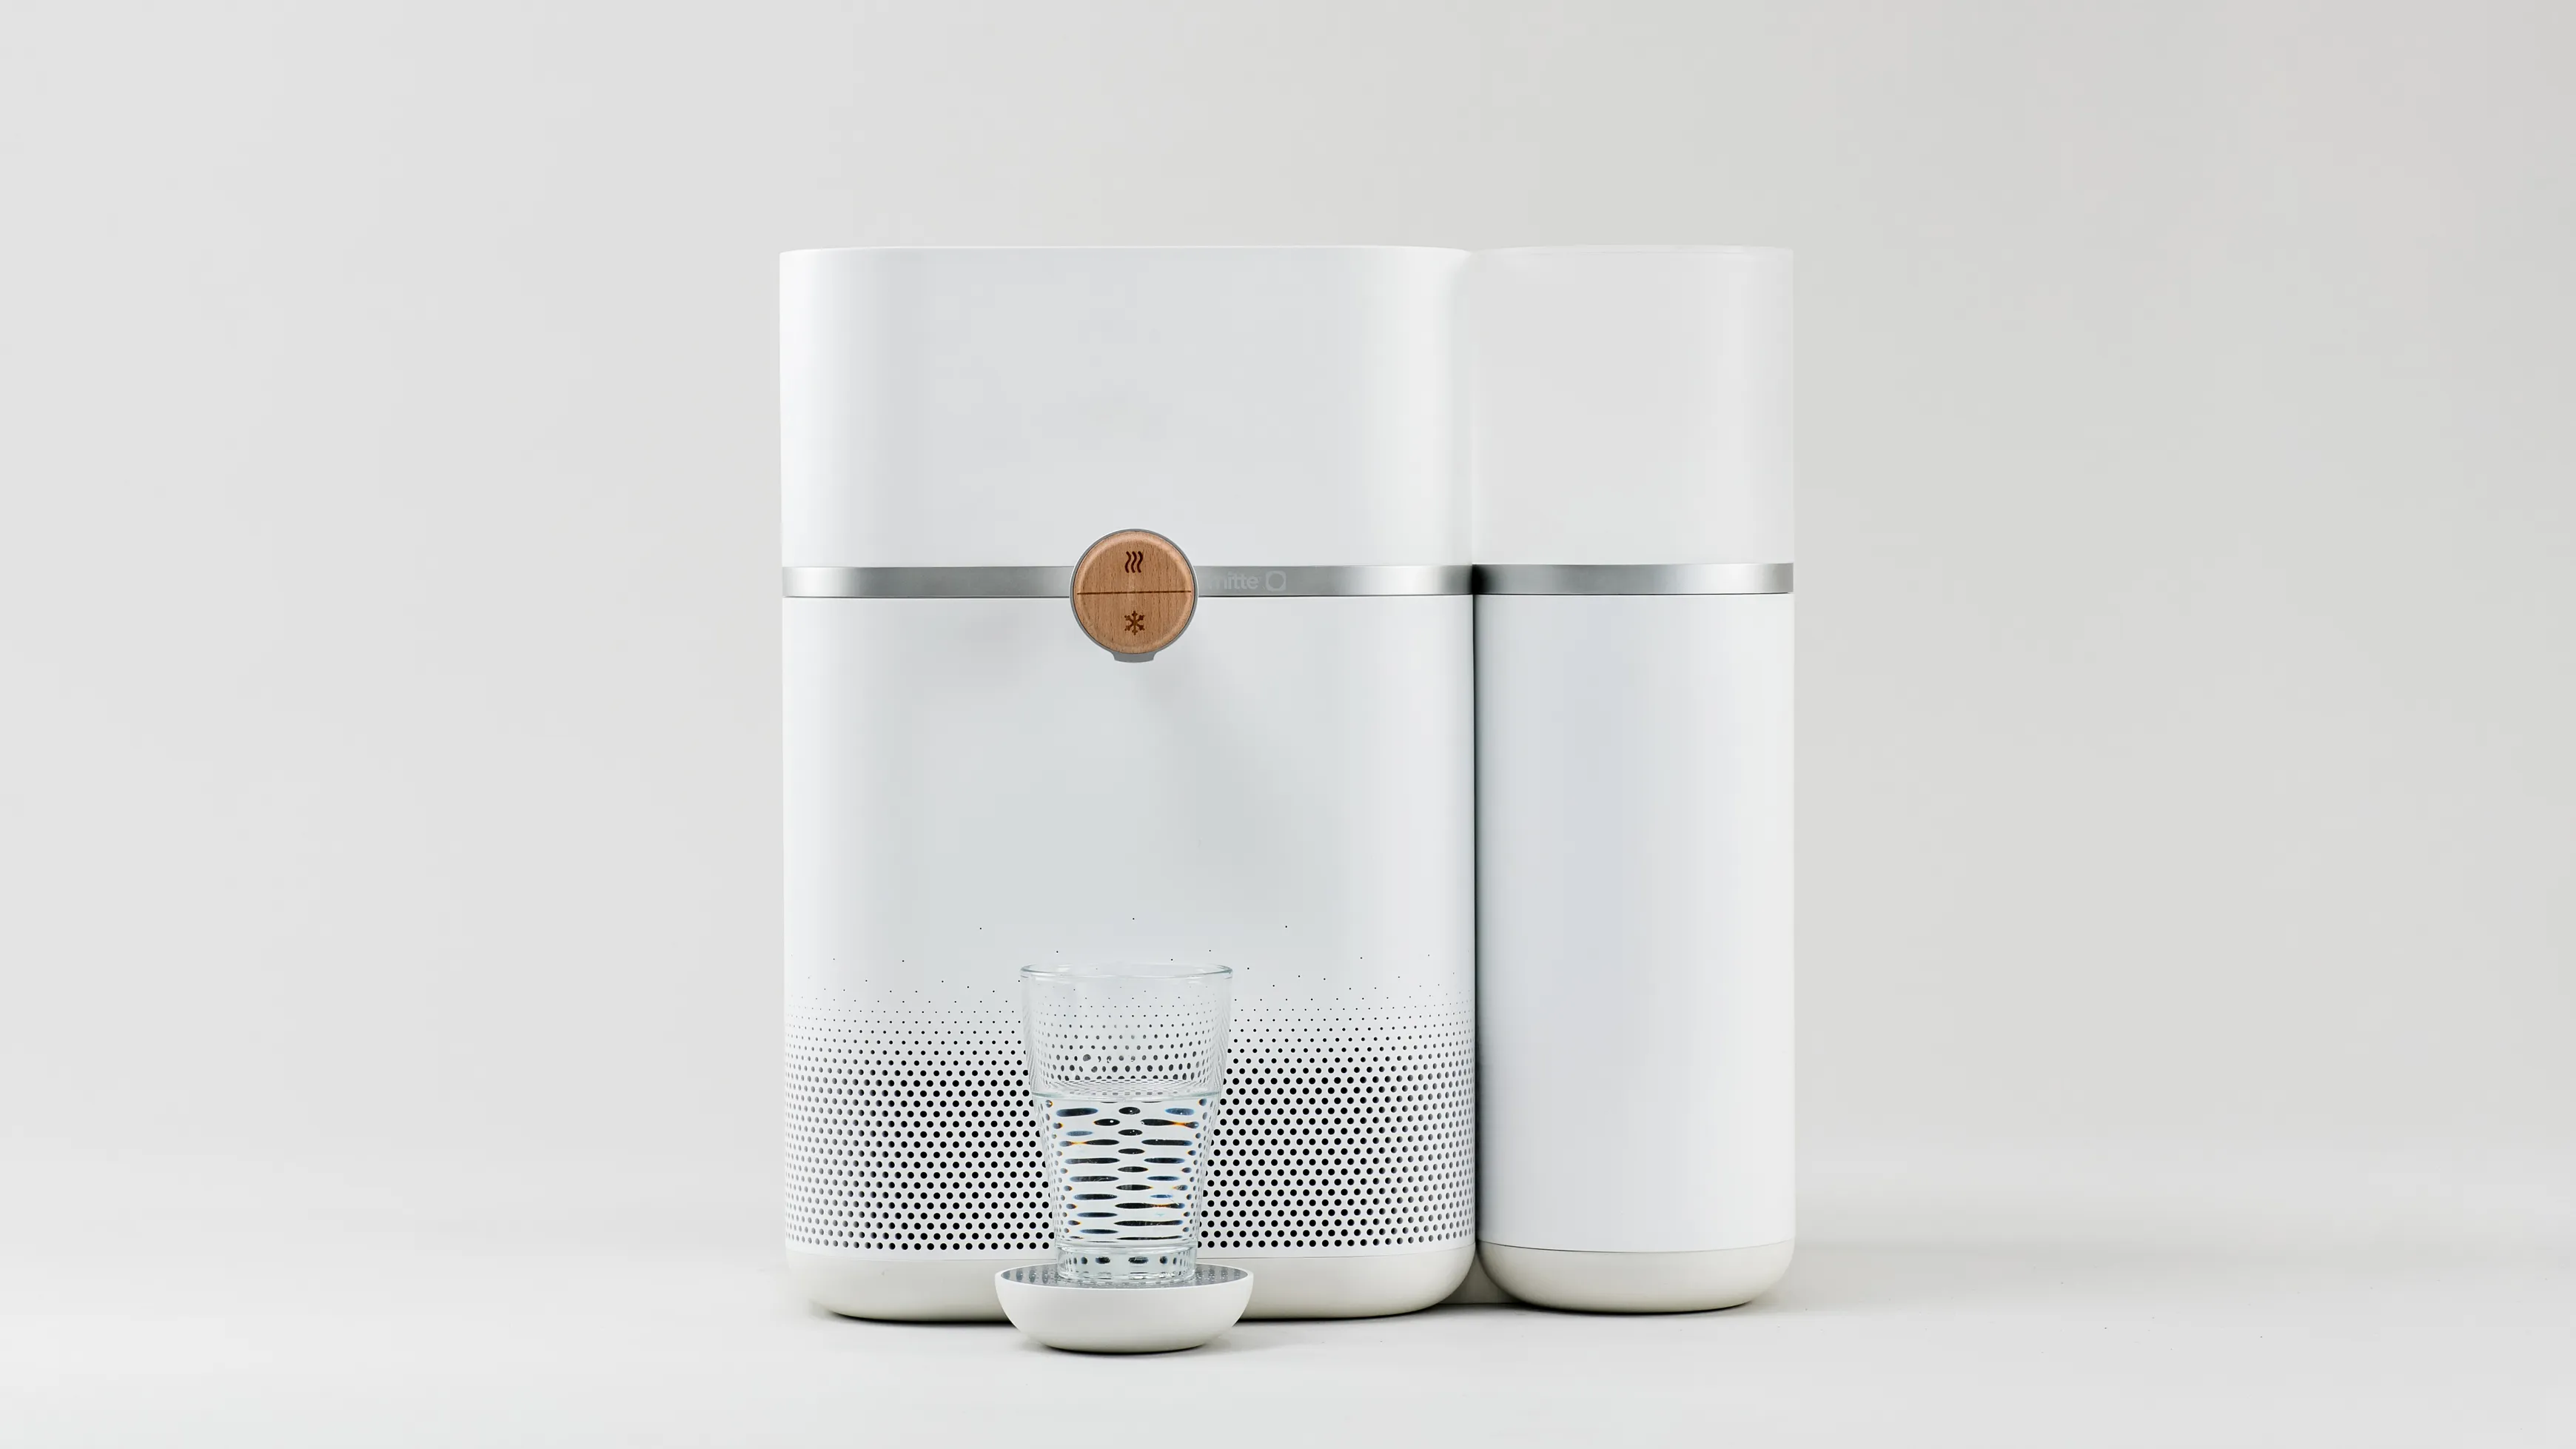 A frontal view of the Mitte water purifier with a water glass